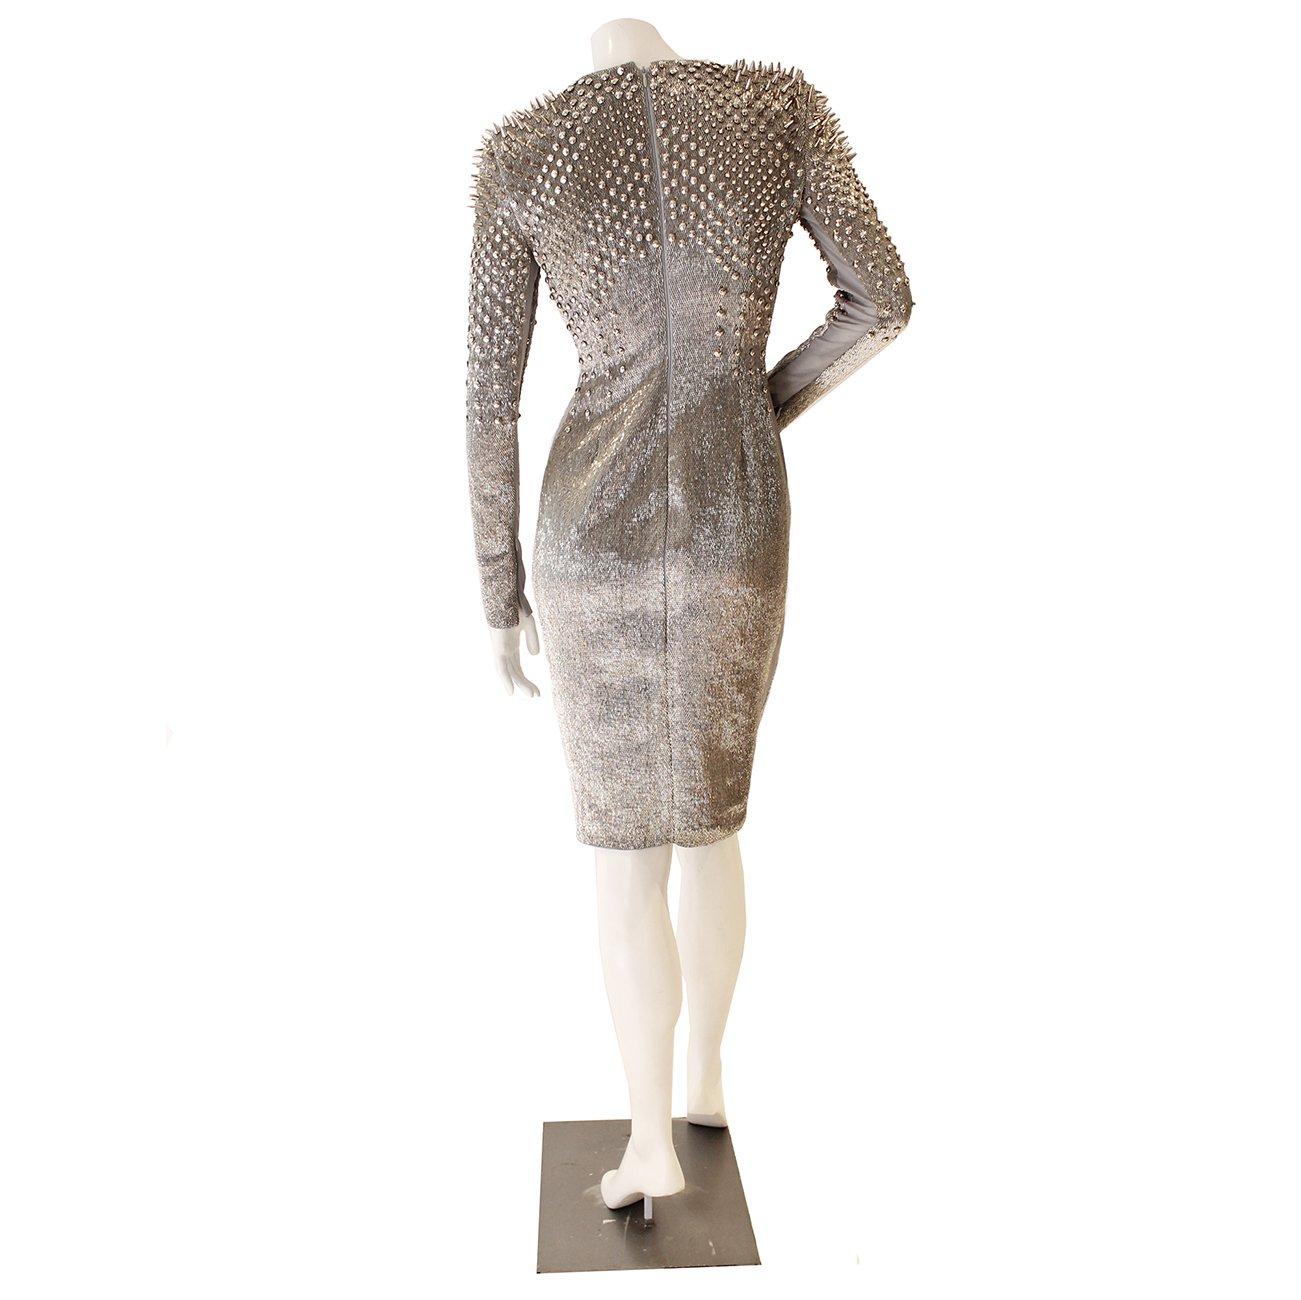 
Exclusive Silver Beaded Stud Dress by Tom Ford
Glass bead exterior with silver stud detailing
Zipper closure at back and zippers on each cuff
Condition: Excellent, new with tags 

Size/Measurements:
Size 38 
26